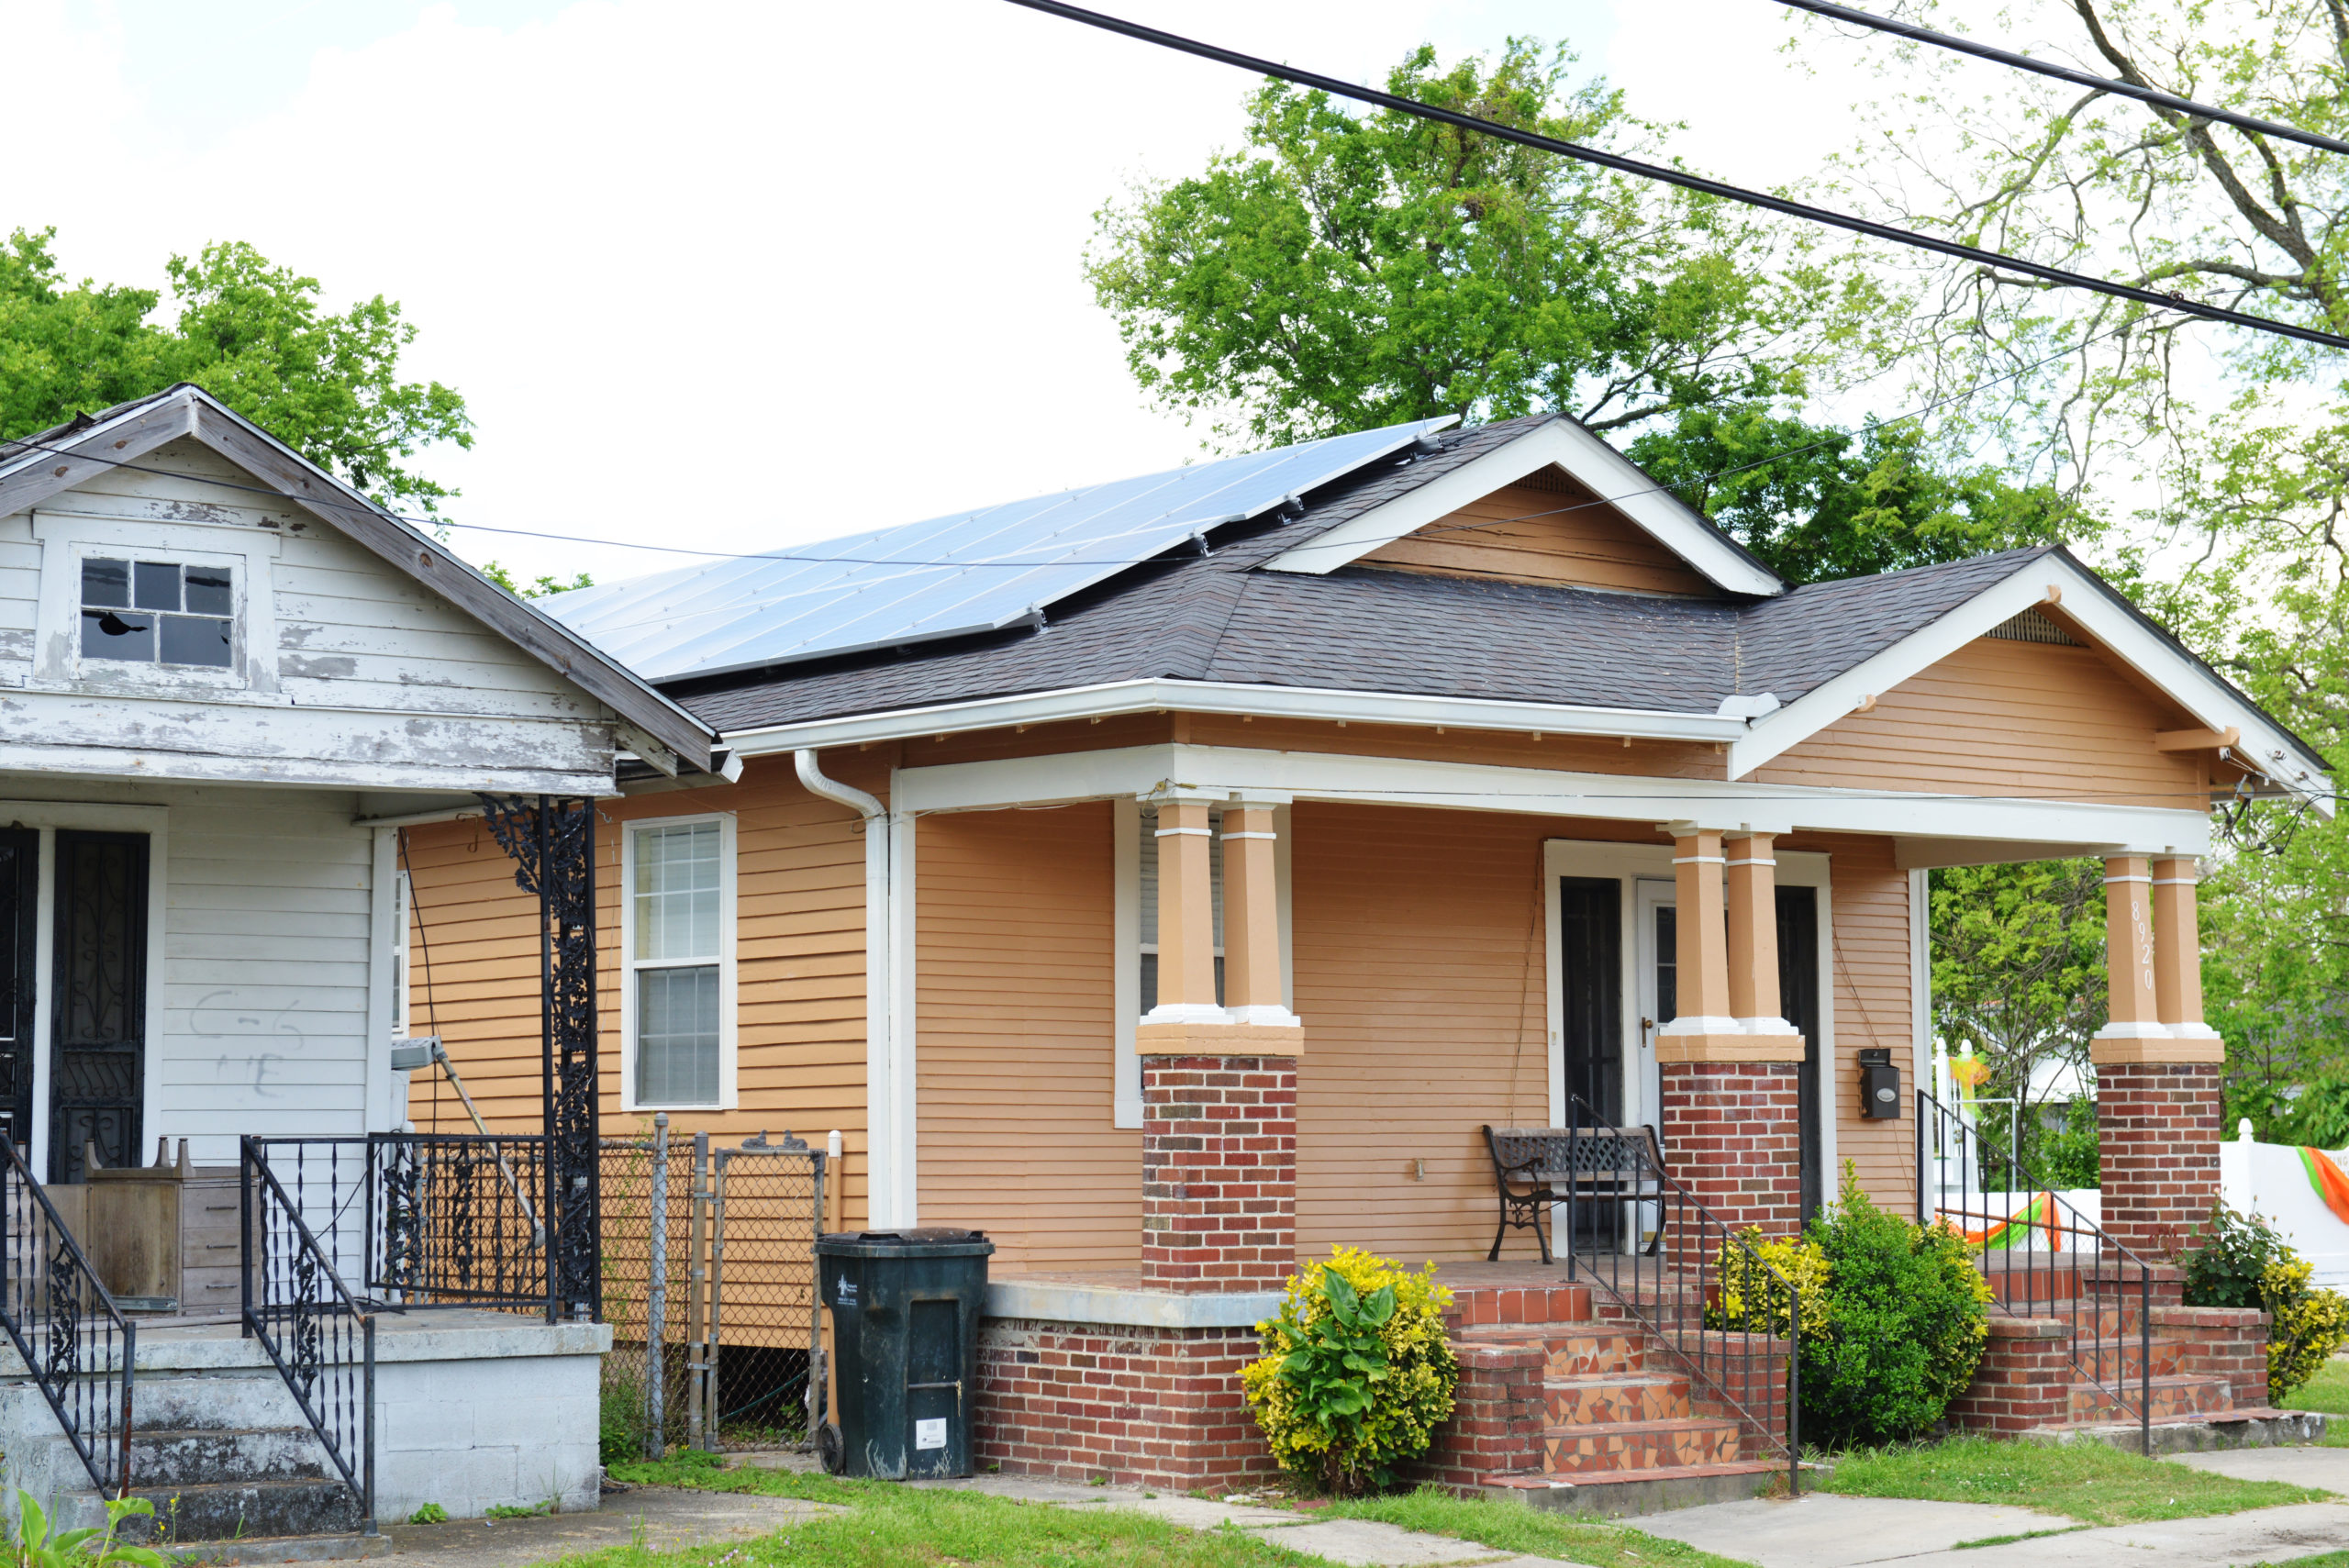 DC Green Bank Commits $7.5M to Residential Solar Projects